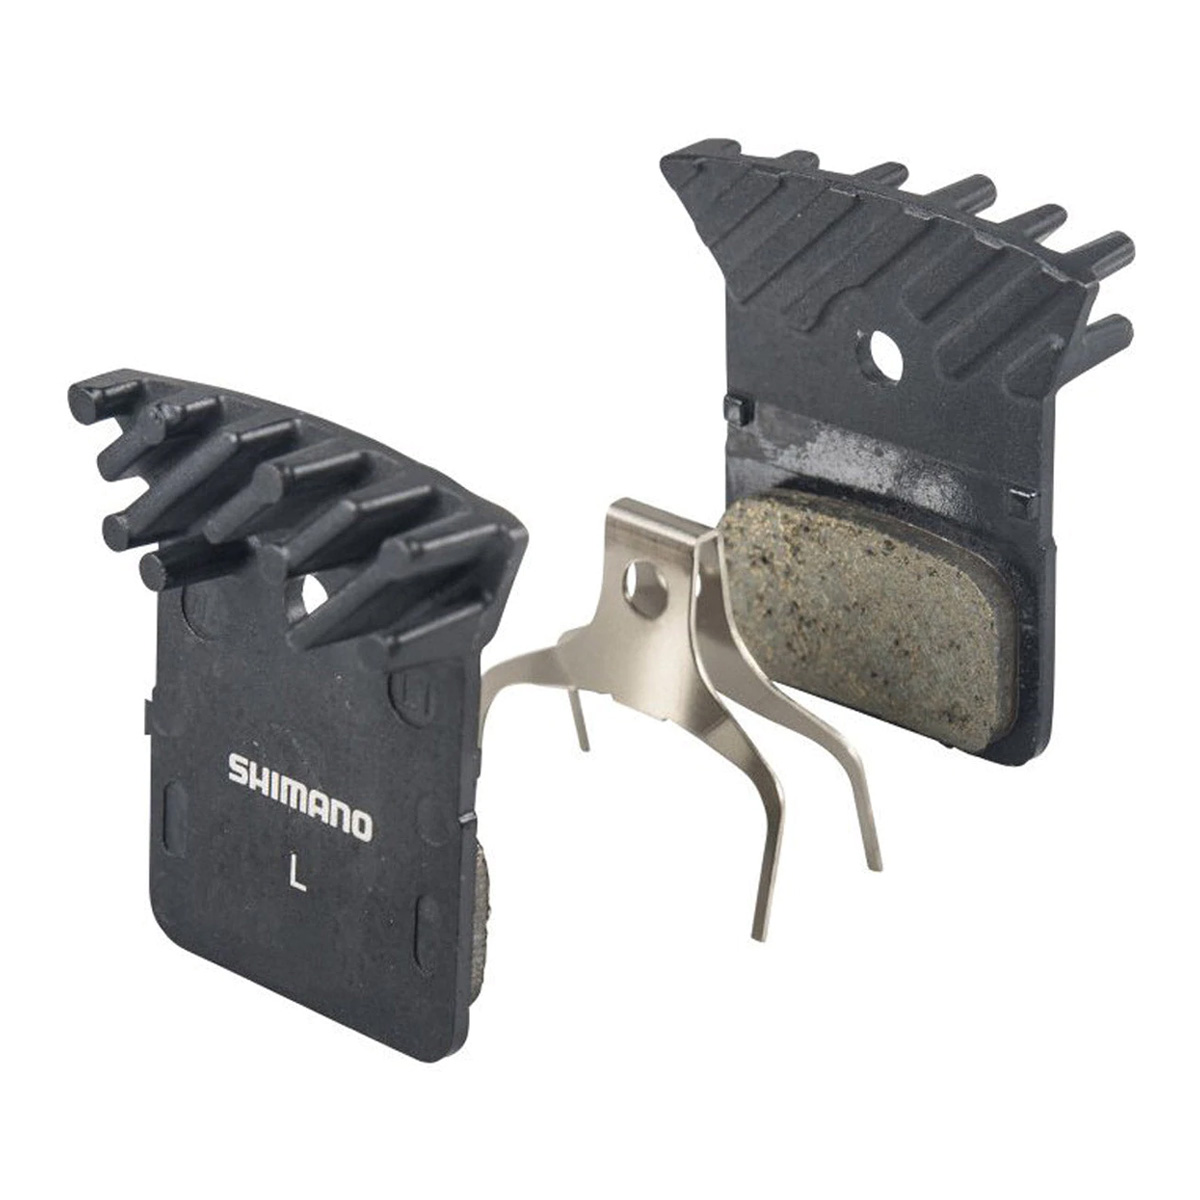 SHIMANO L05A ORGANIC BRAKE PADS WITH FINS